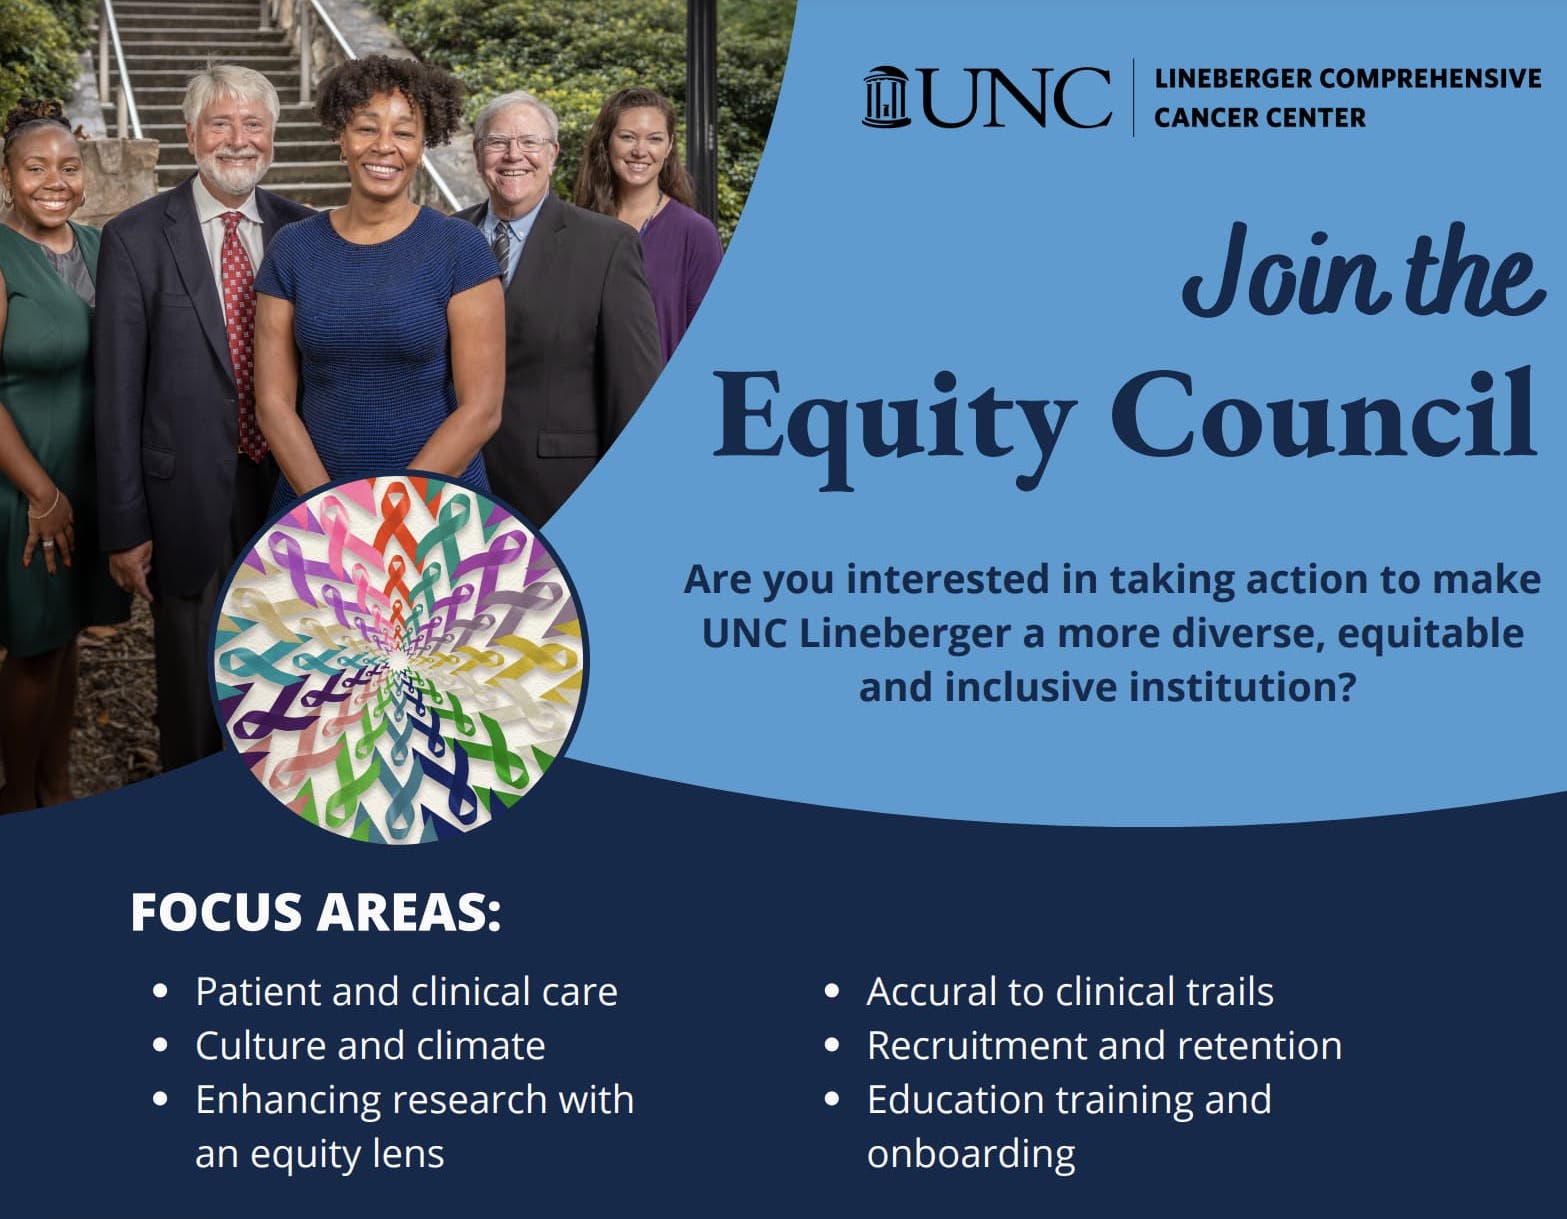 Join the Equity Council. Are you interested in taking action to make UNC Lineberger a more diverse, equitable and inclusive institution?